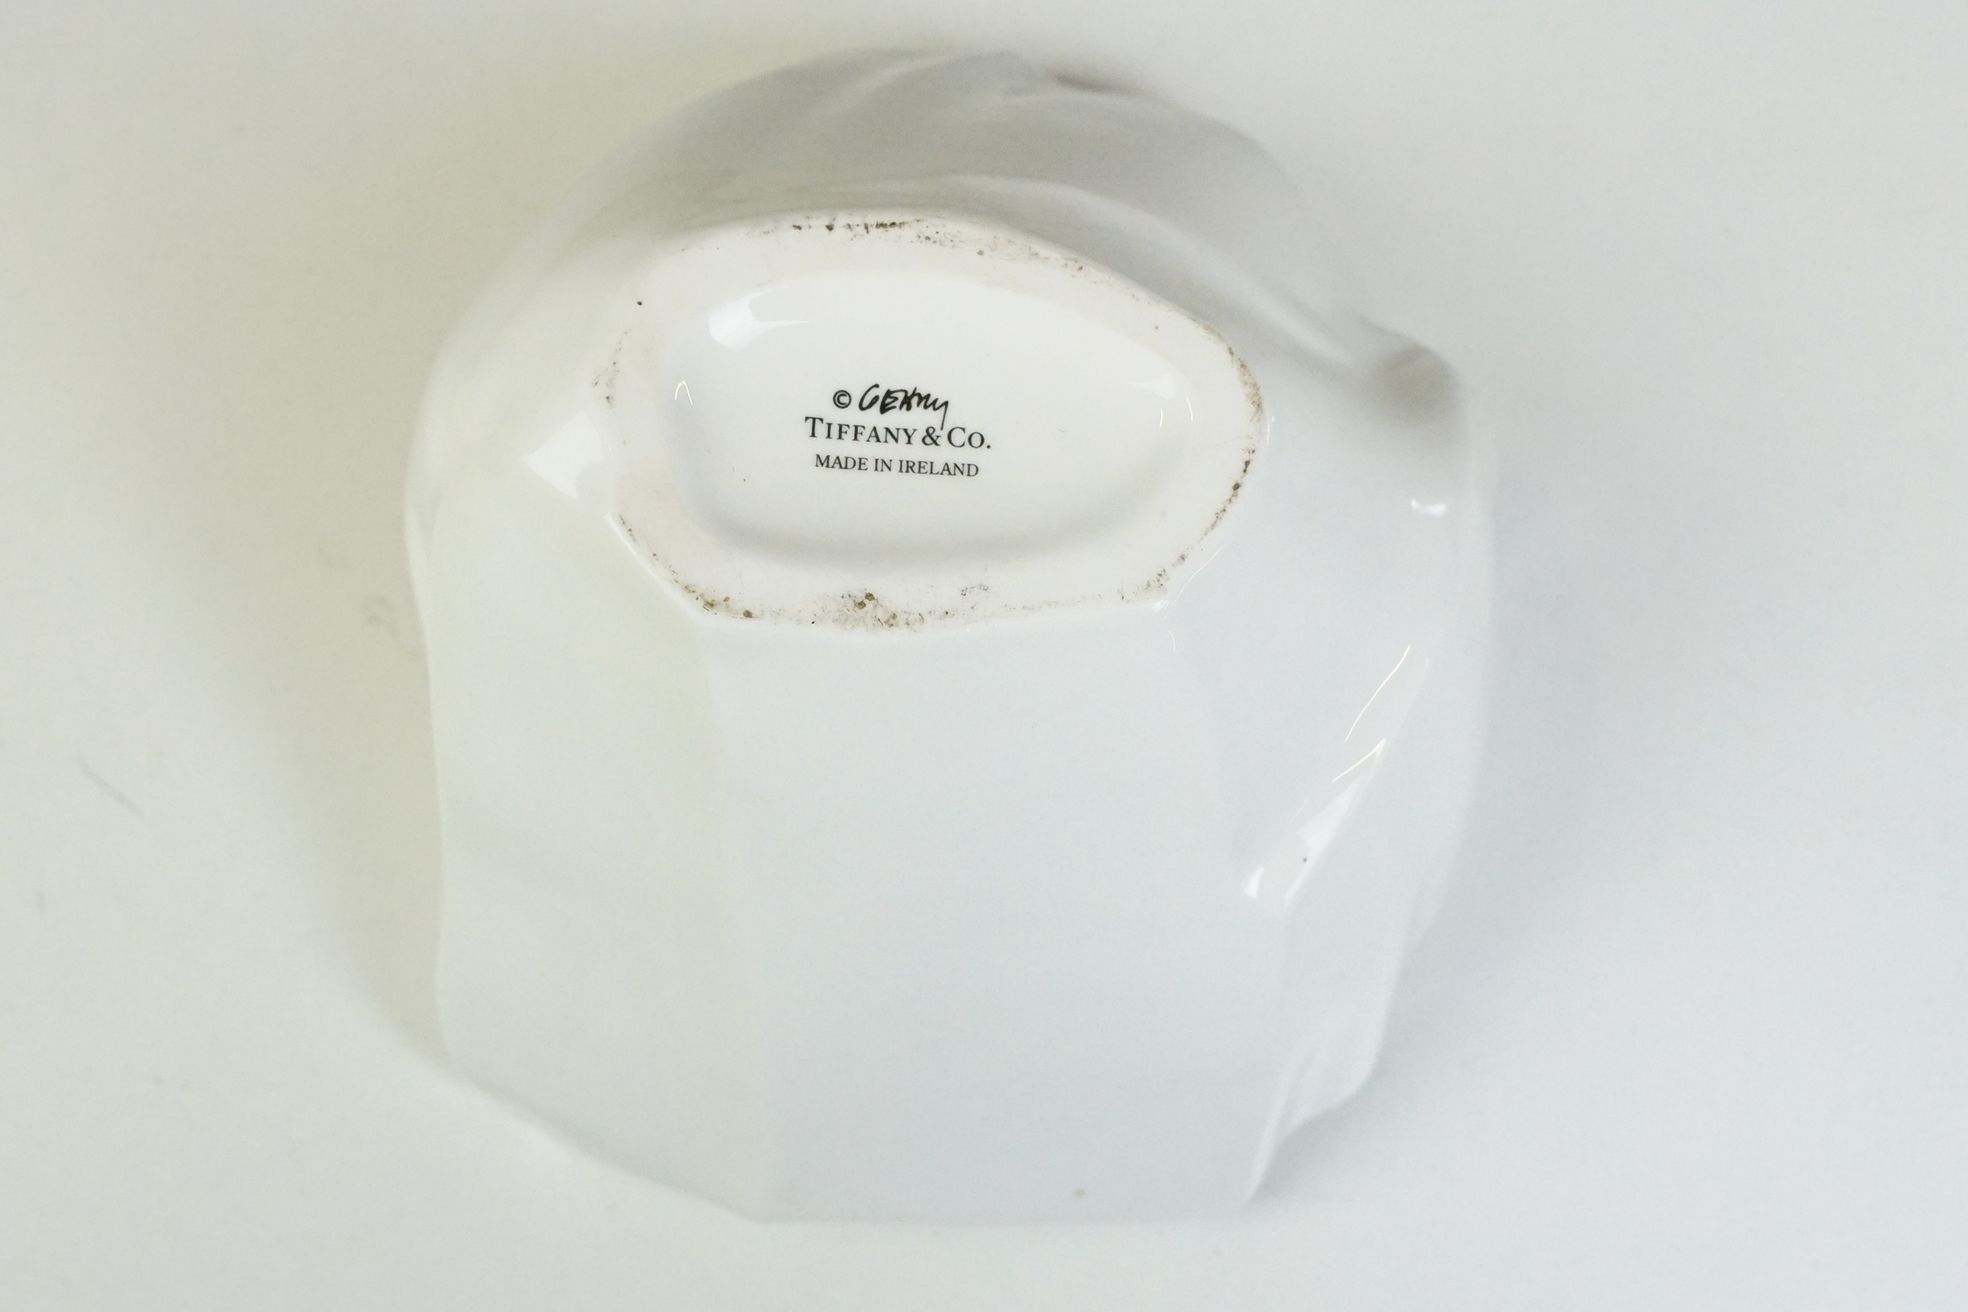 Frank Gehry for Tiffany & Co white ceramic rock series bowl. Tiffany & co mark to base along with - Image 7 of 10